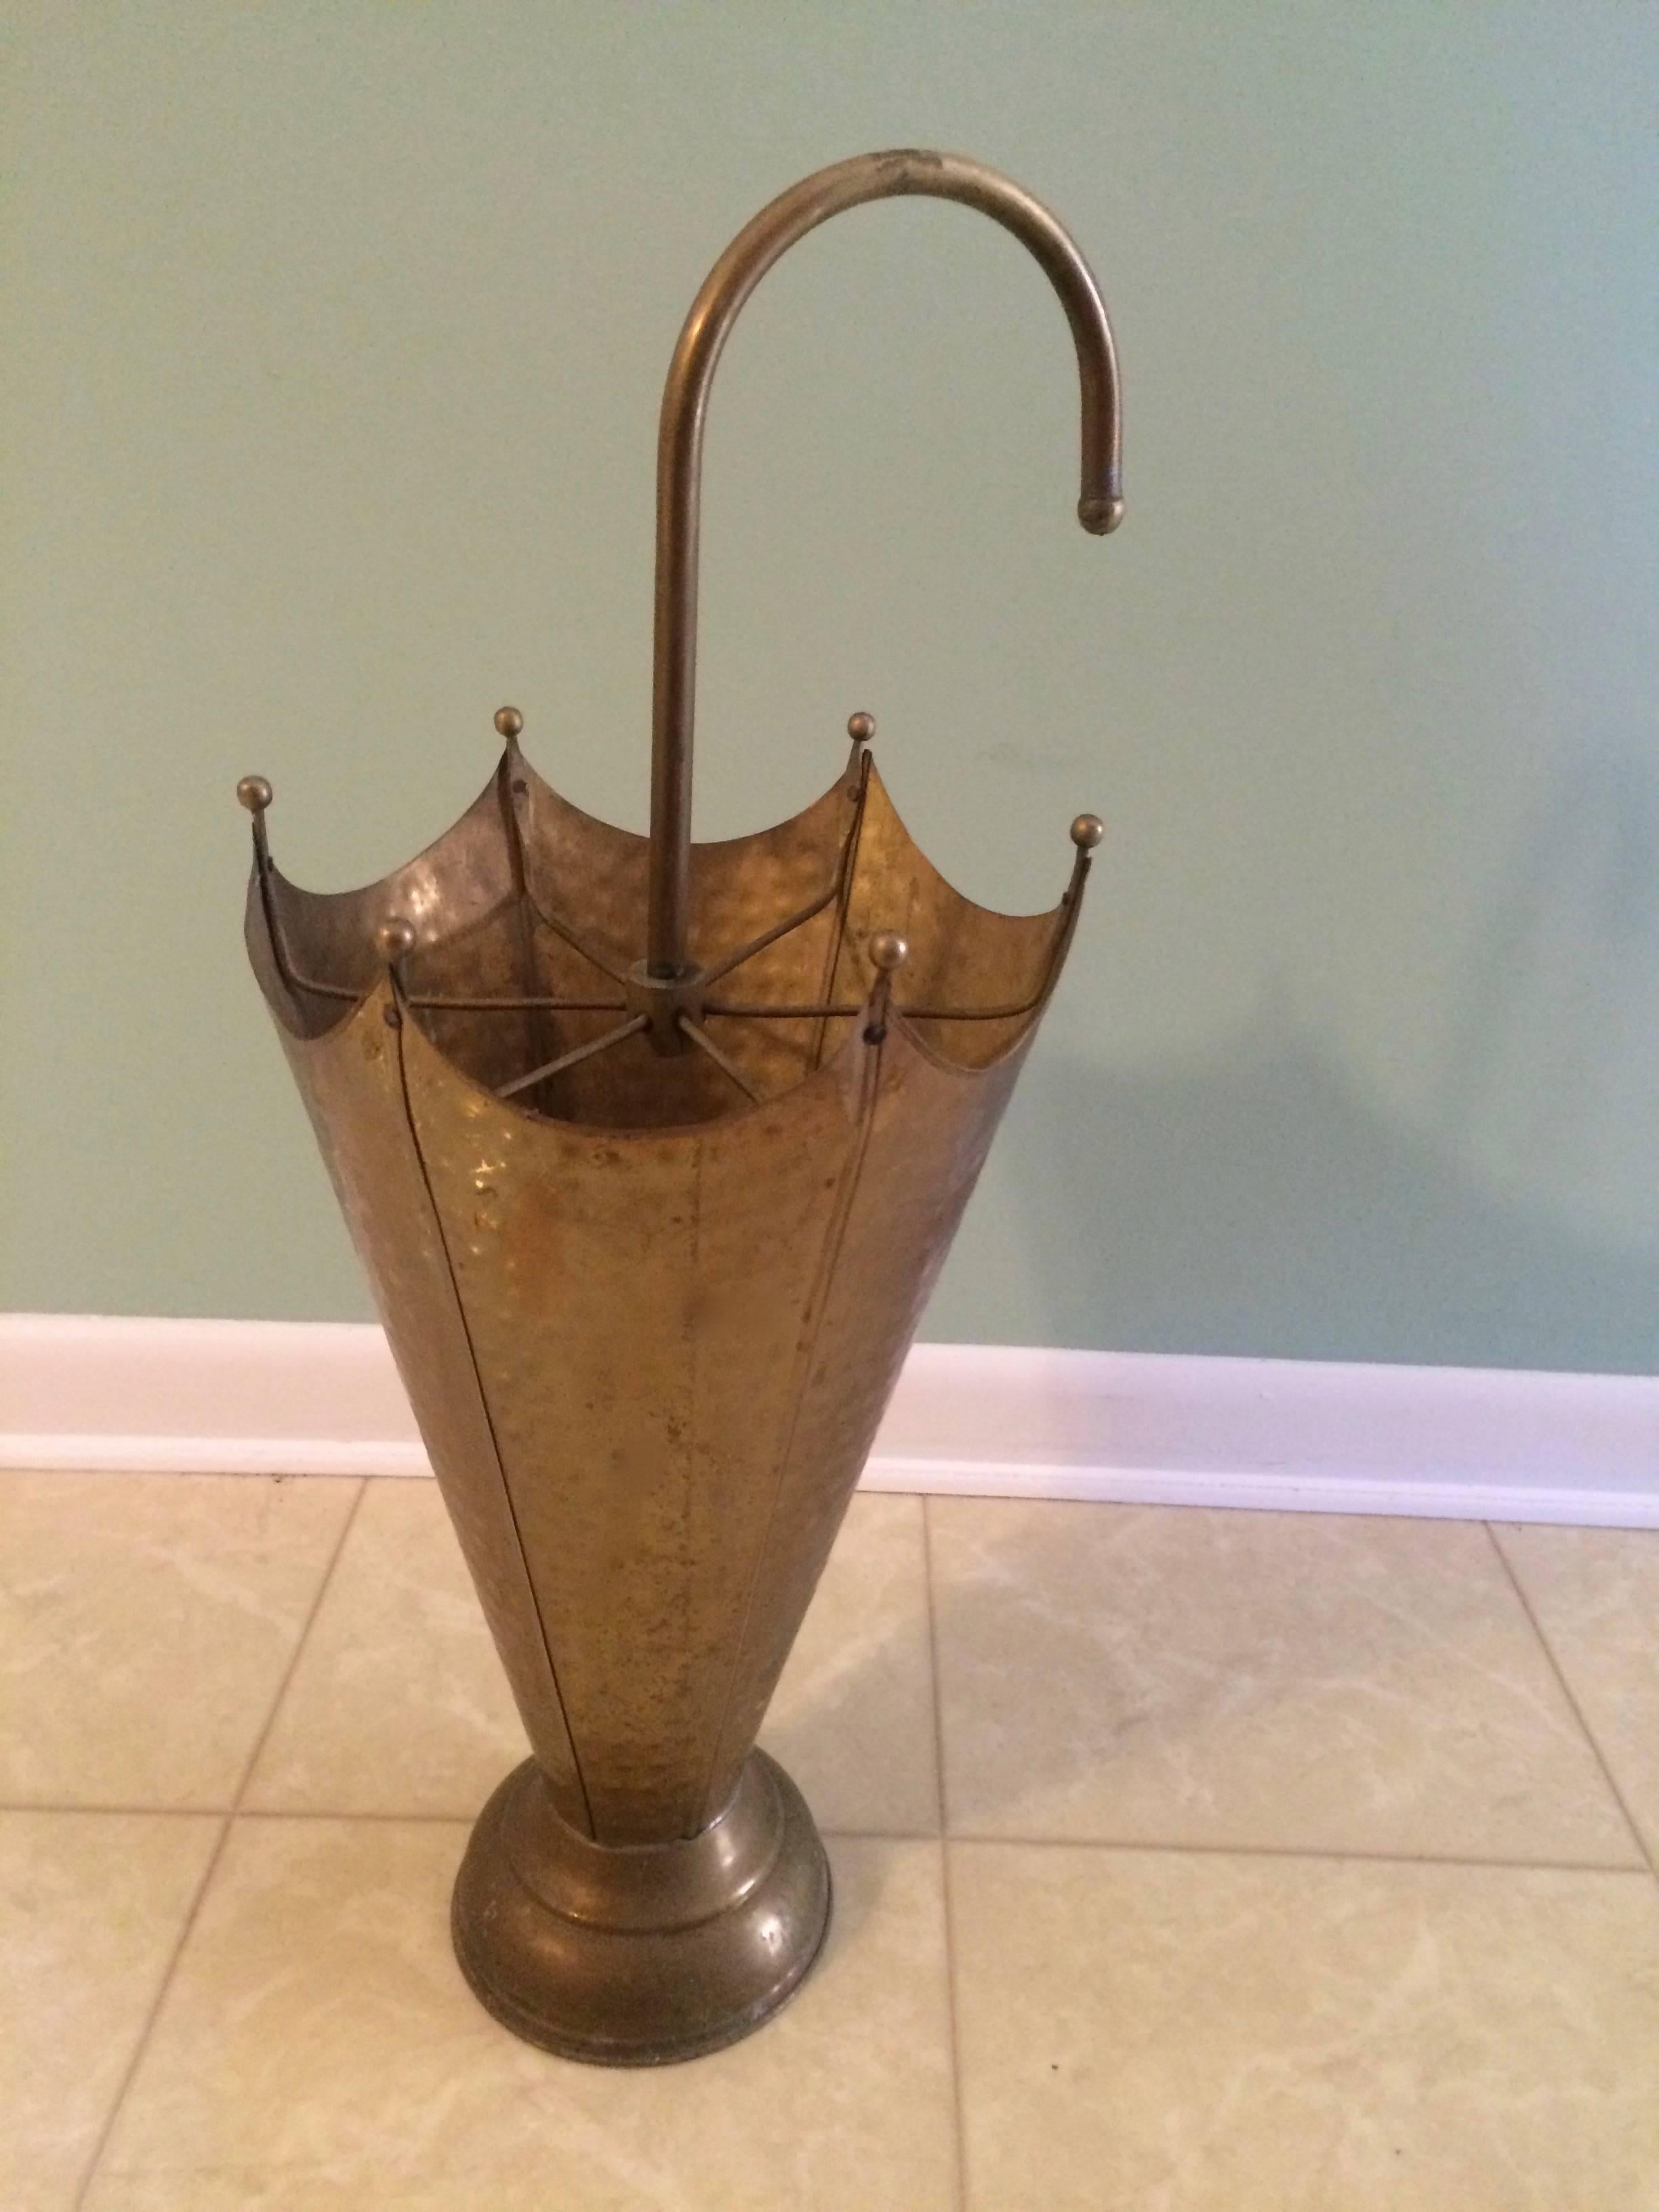 Keep the water off the floor and your guests talking about this wonderful hammered brass umbrella Stand, French, circa 1940. A great piece for any entry or conversation.